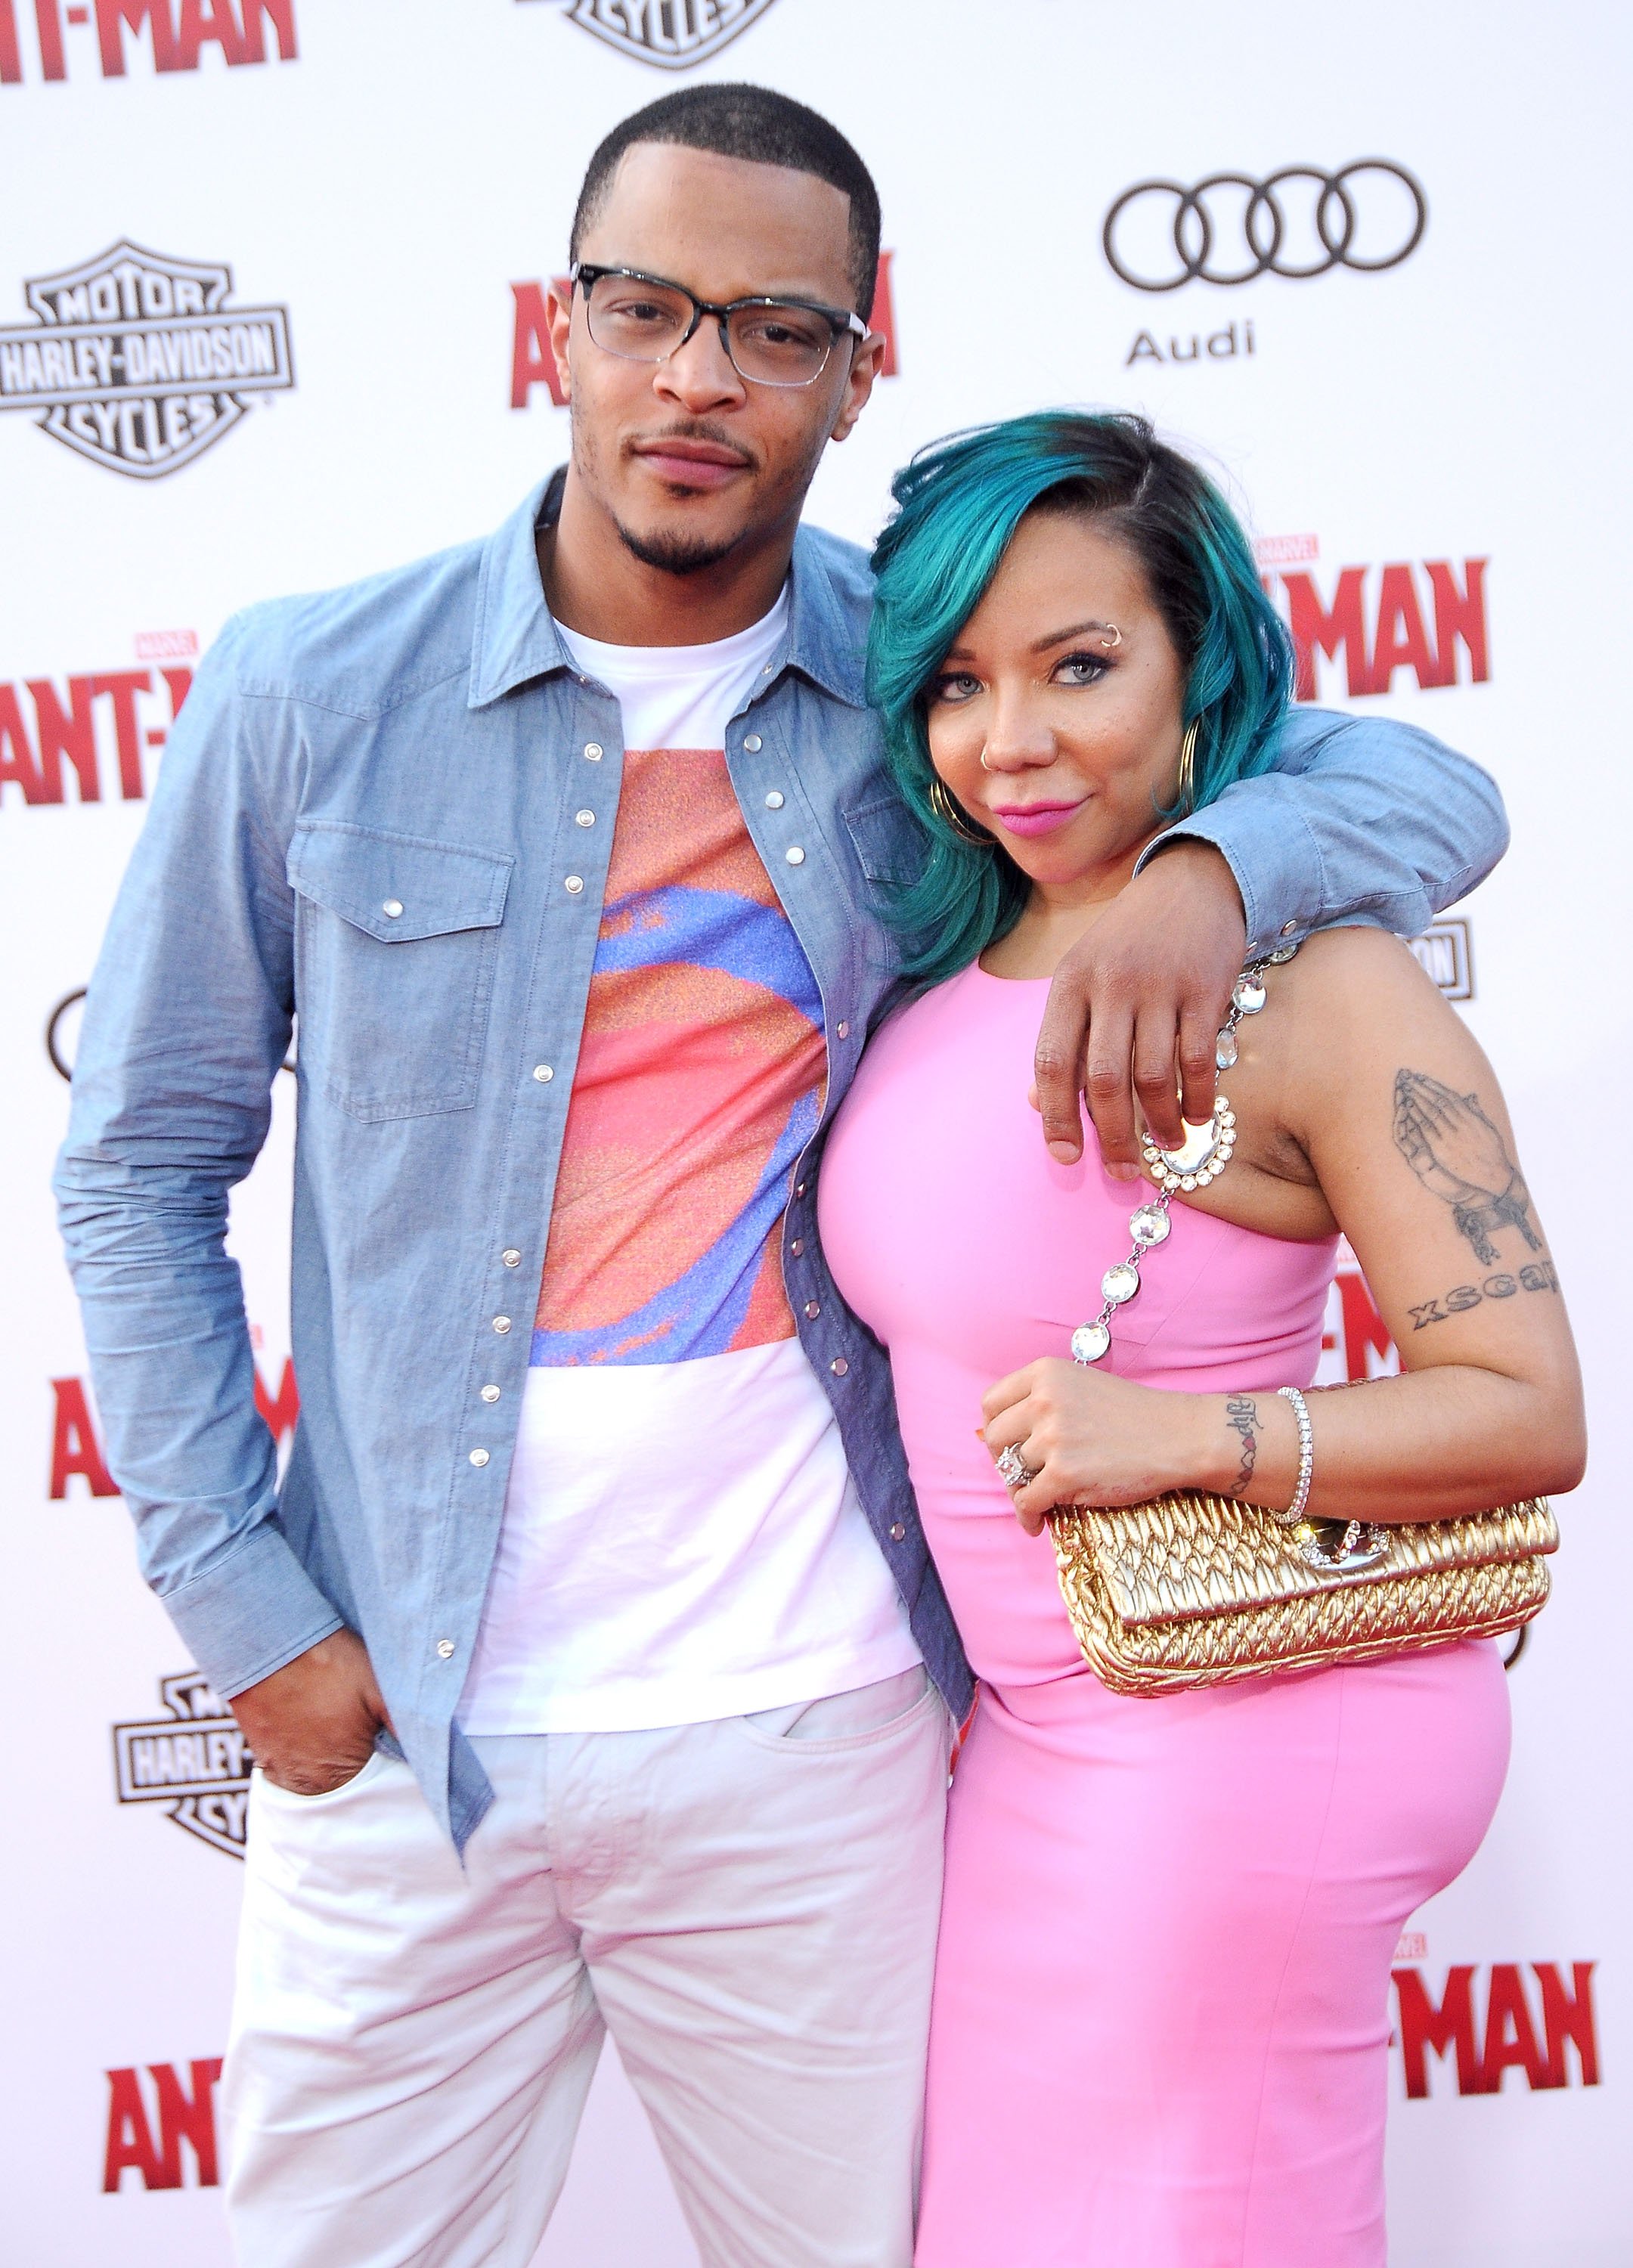 T.I. & Tiny at the Premiere of 'Ant-Man' at Dolby Theatre on June 29, 2015 in Hollywood, California. | Photo: Getty Images